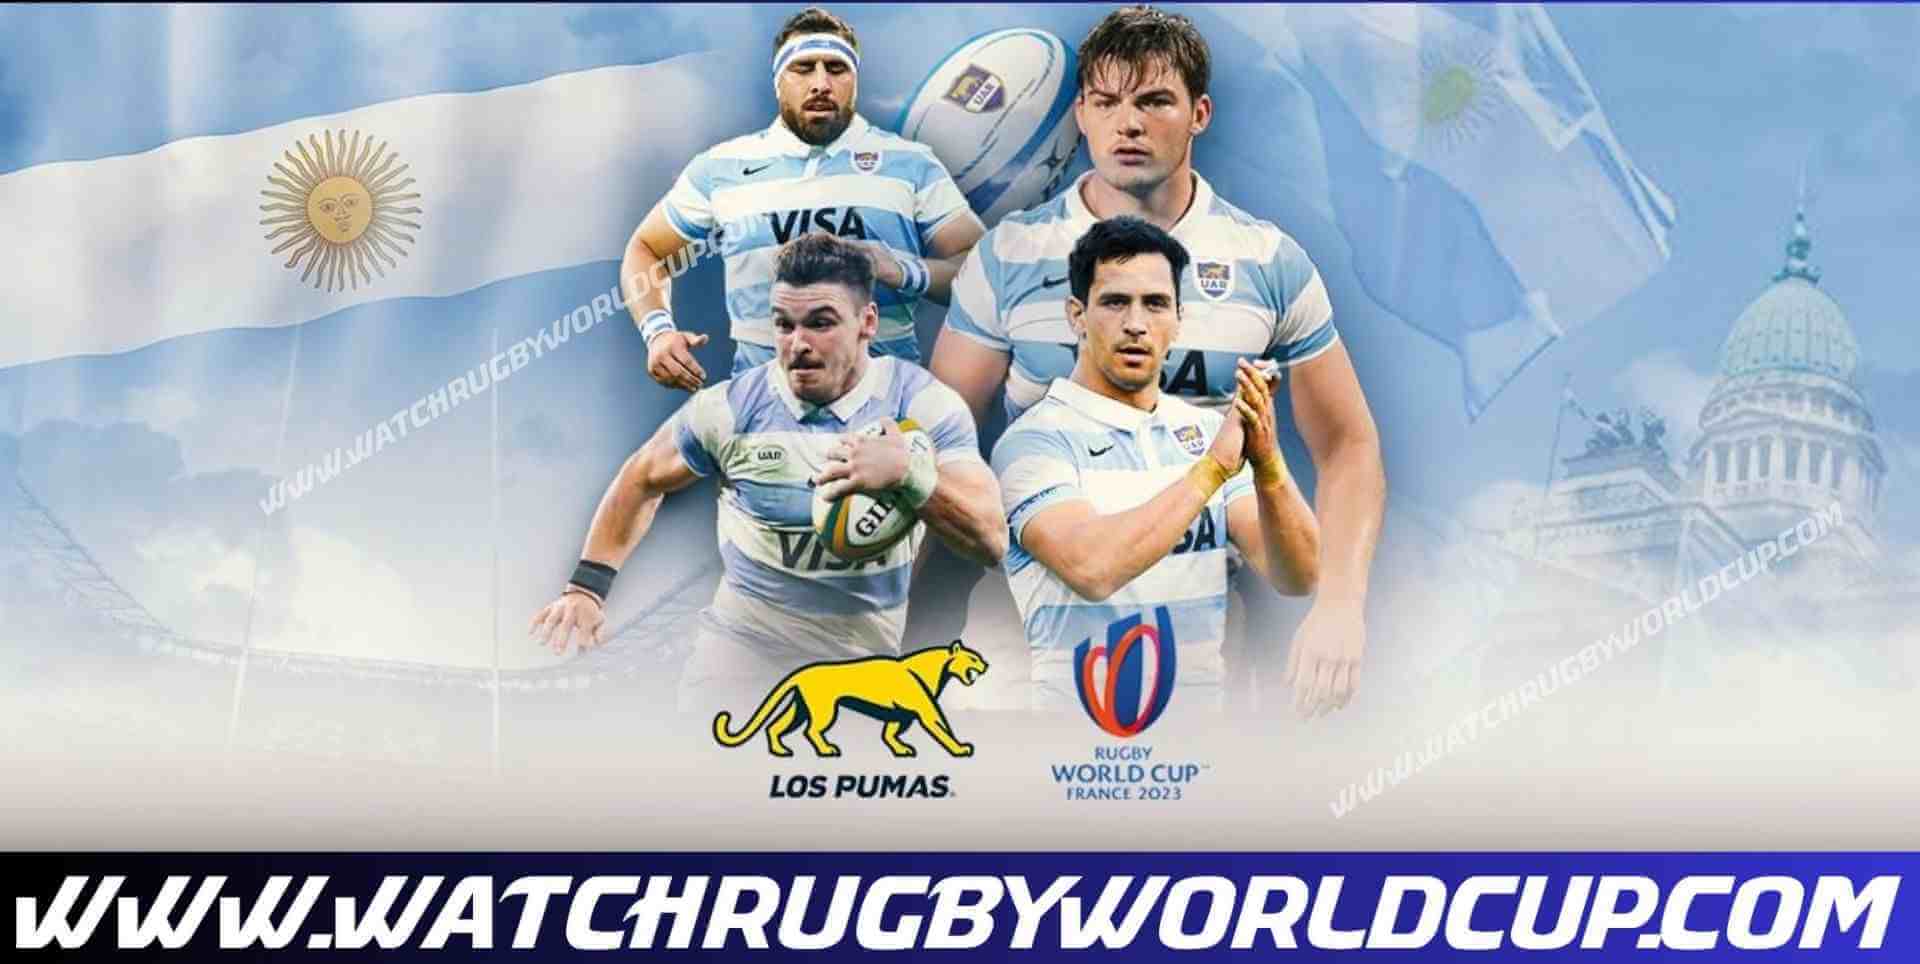 Watch Live Streaming of Team Argentina in Rugby World Cup 2023 Online